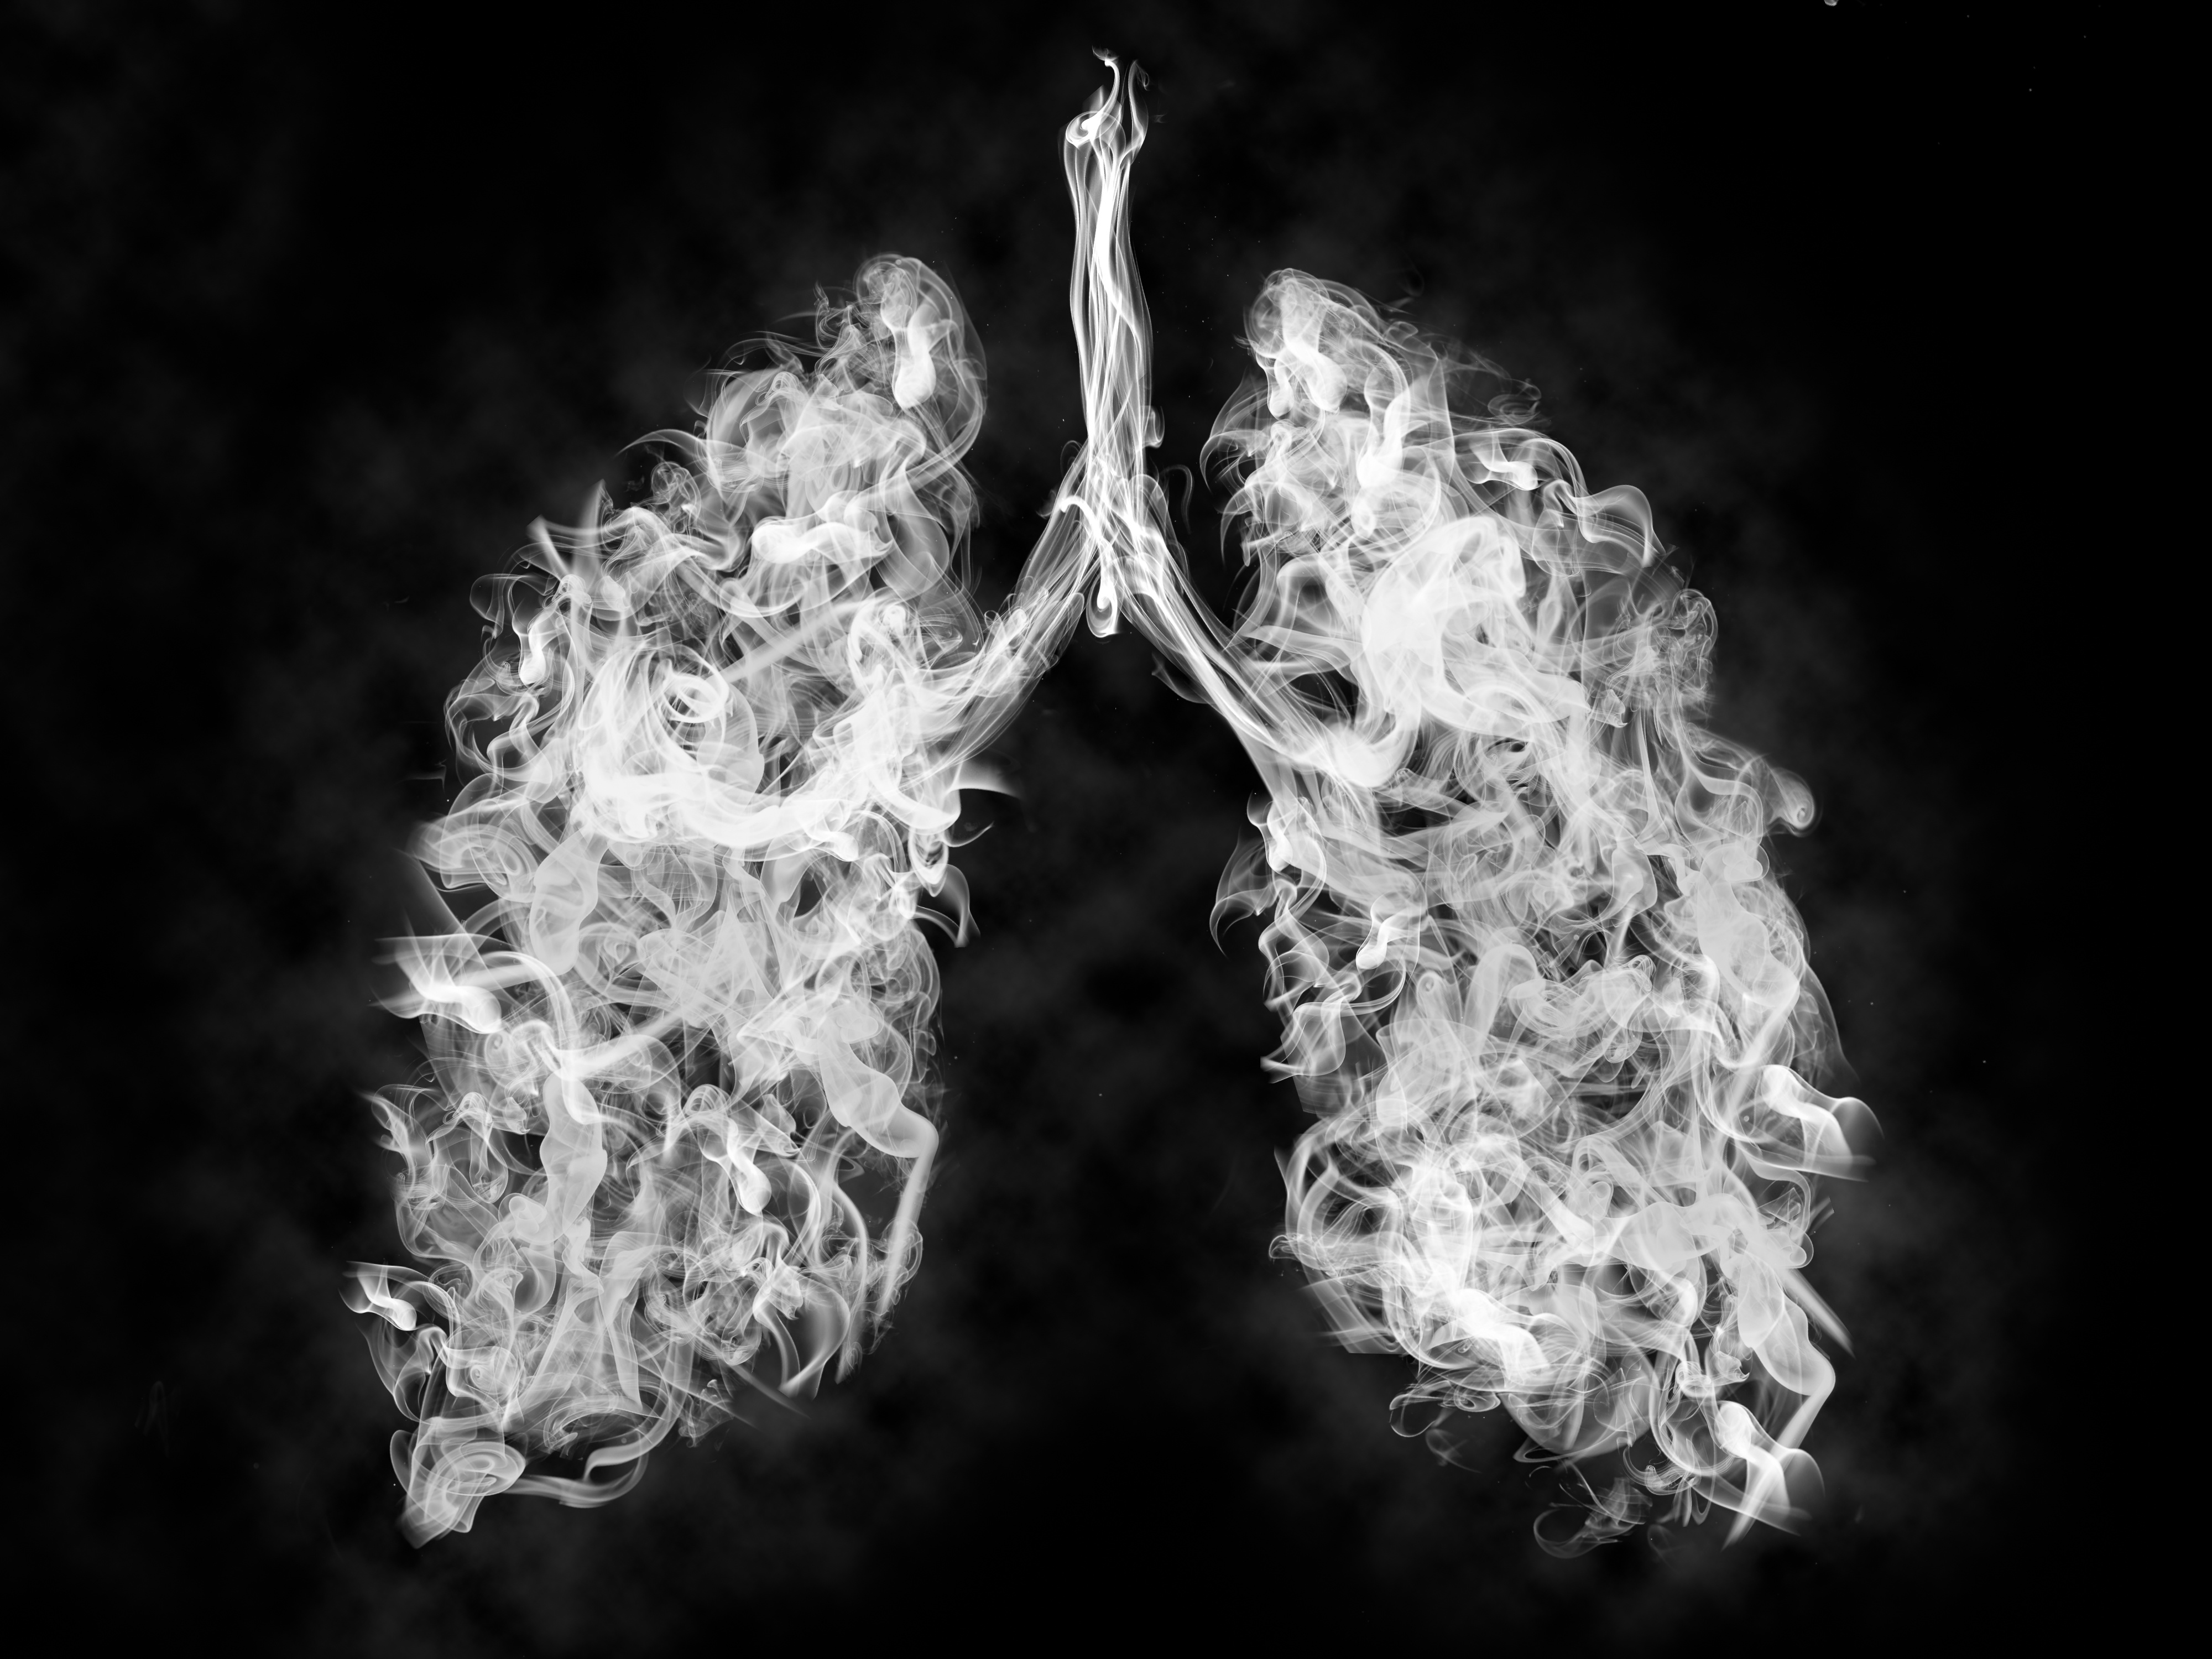 An illustration of smoke filled lungs.